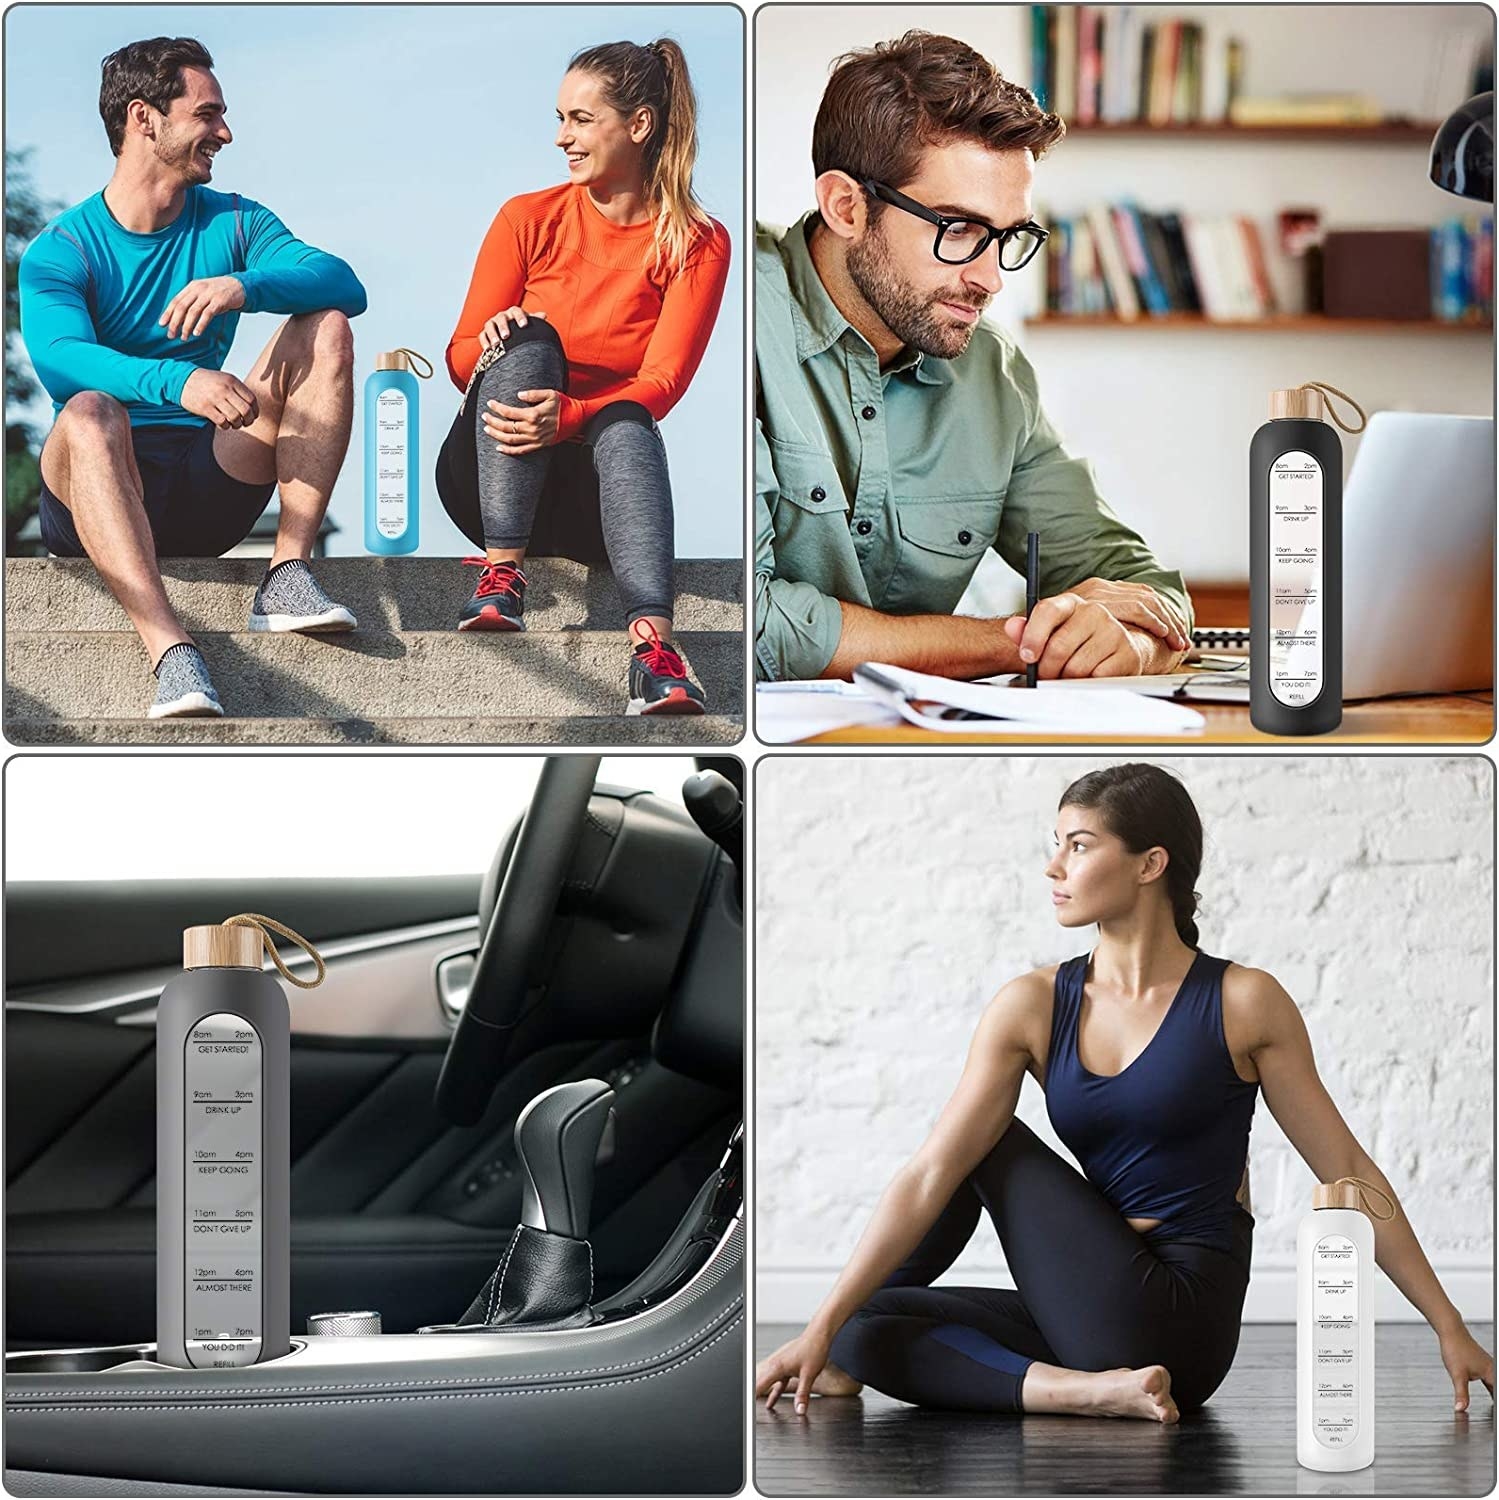 The water bottle in four different scenarios including beside a person doing yoga, in a car, between two people, and on a desk